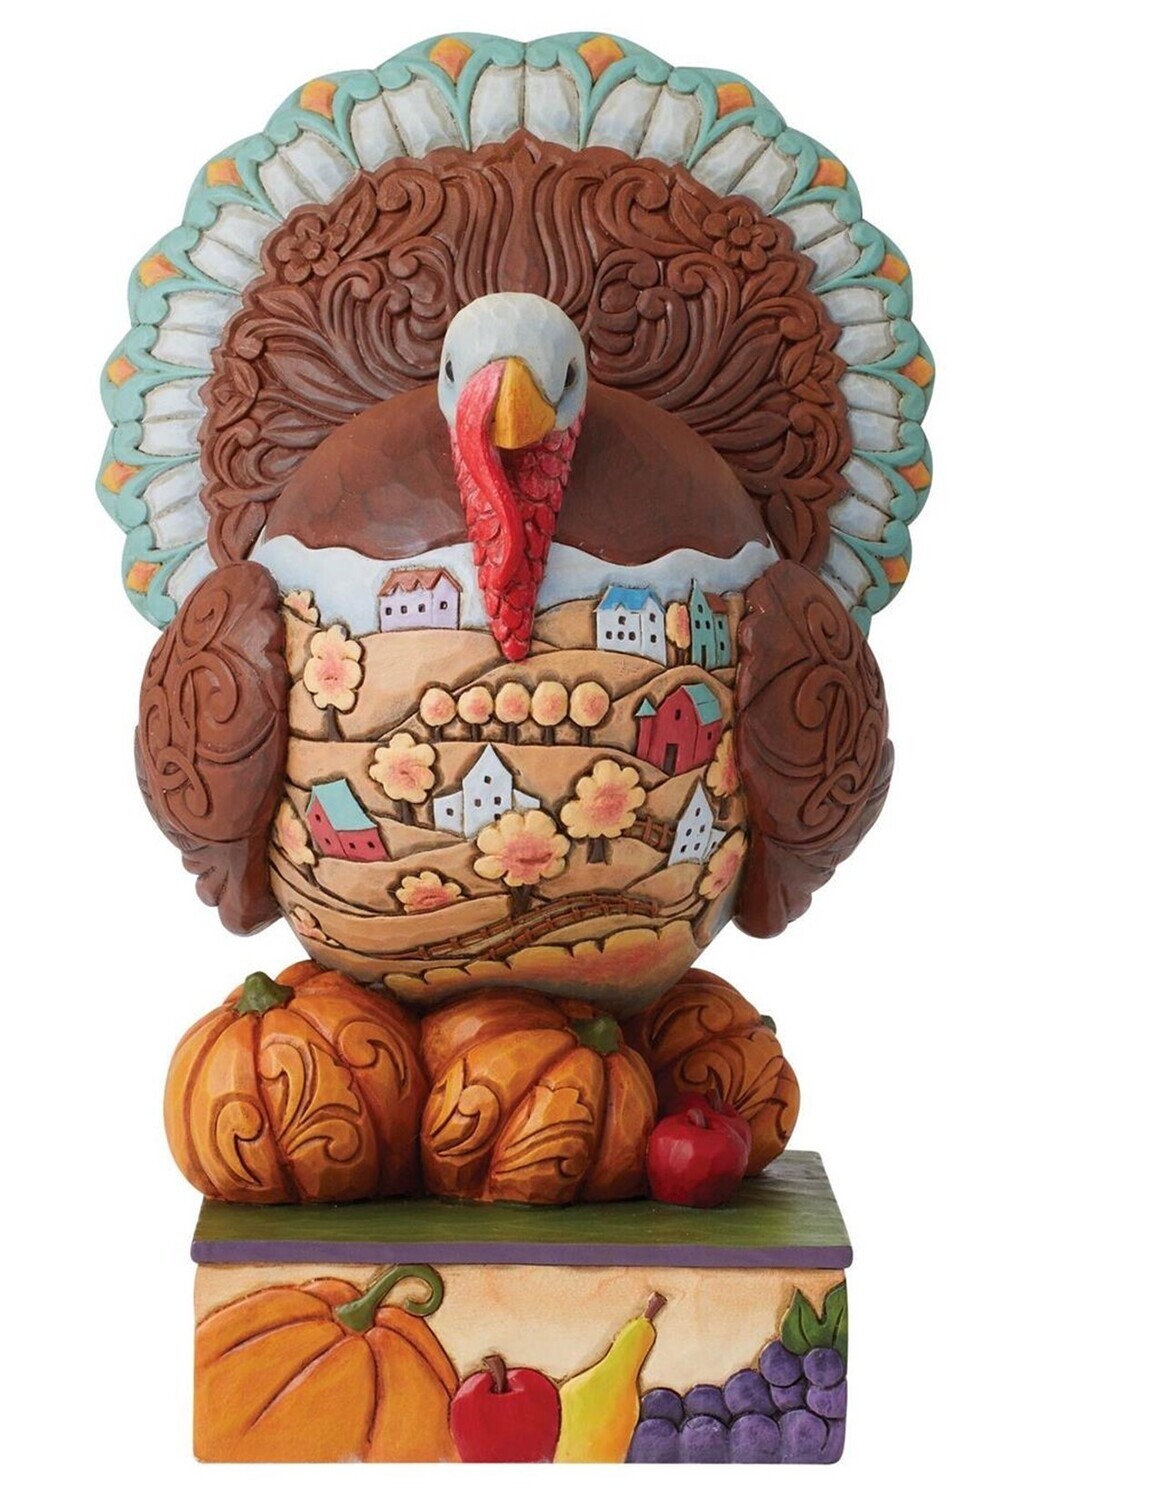 Jim Shore Heartwood Creek "Thanks and Giving" Thanksgiving Turkey Figurine (6012830)